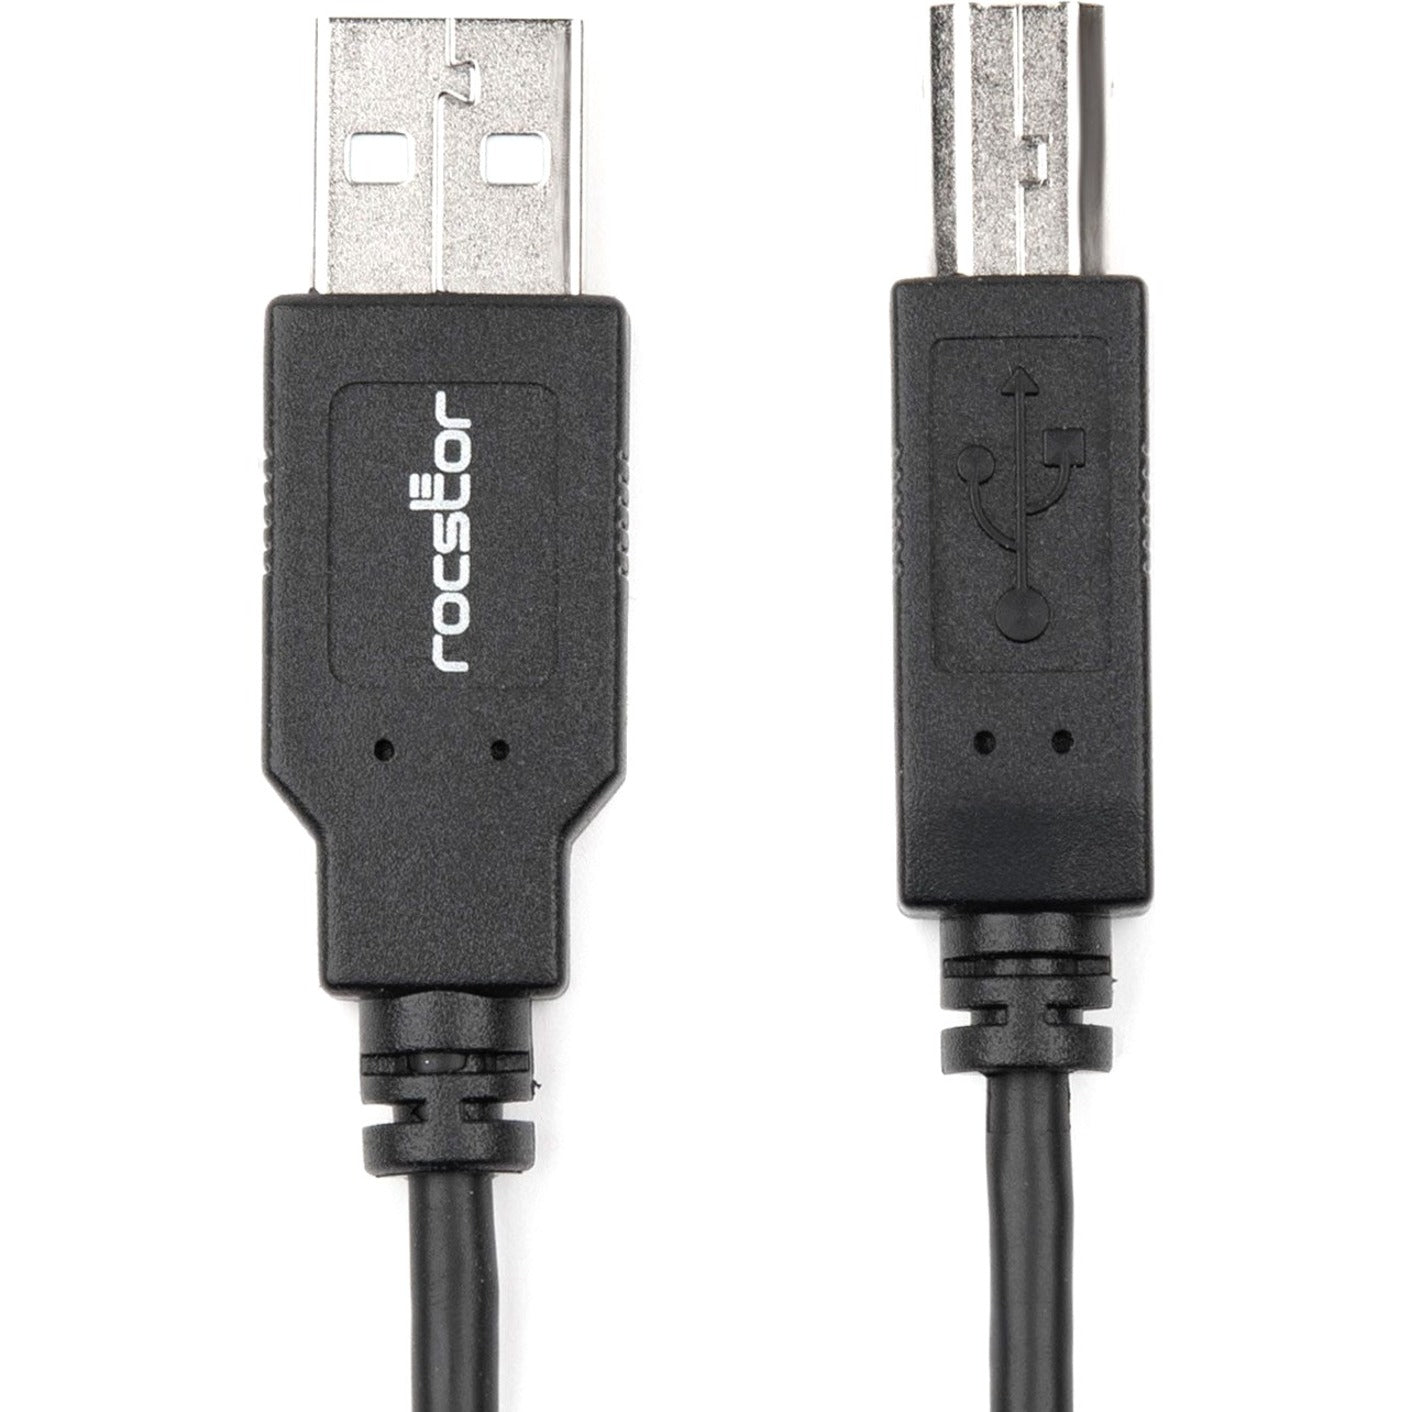 Rocstor Y10C116-B1 Premium 6 ft USB 2.0 Type-A to Type-B Cable - M/M, Data Transfer Cable